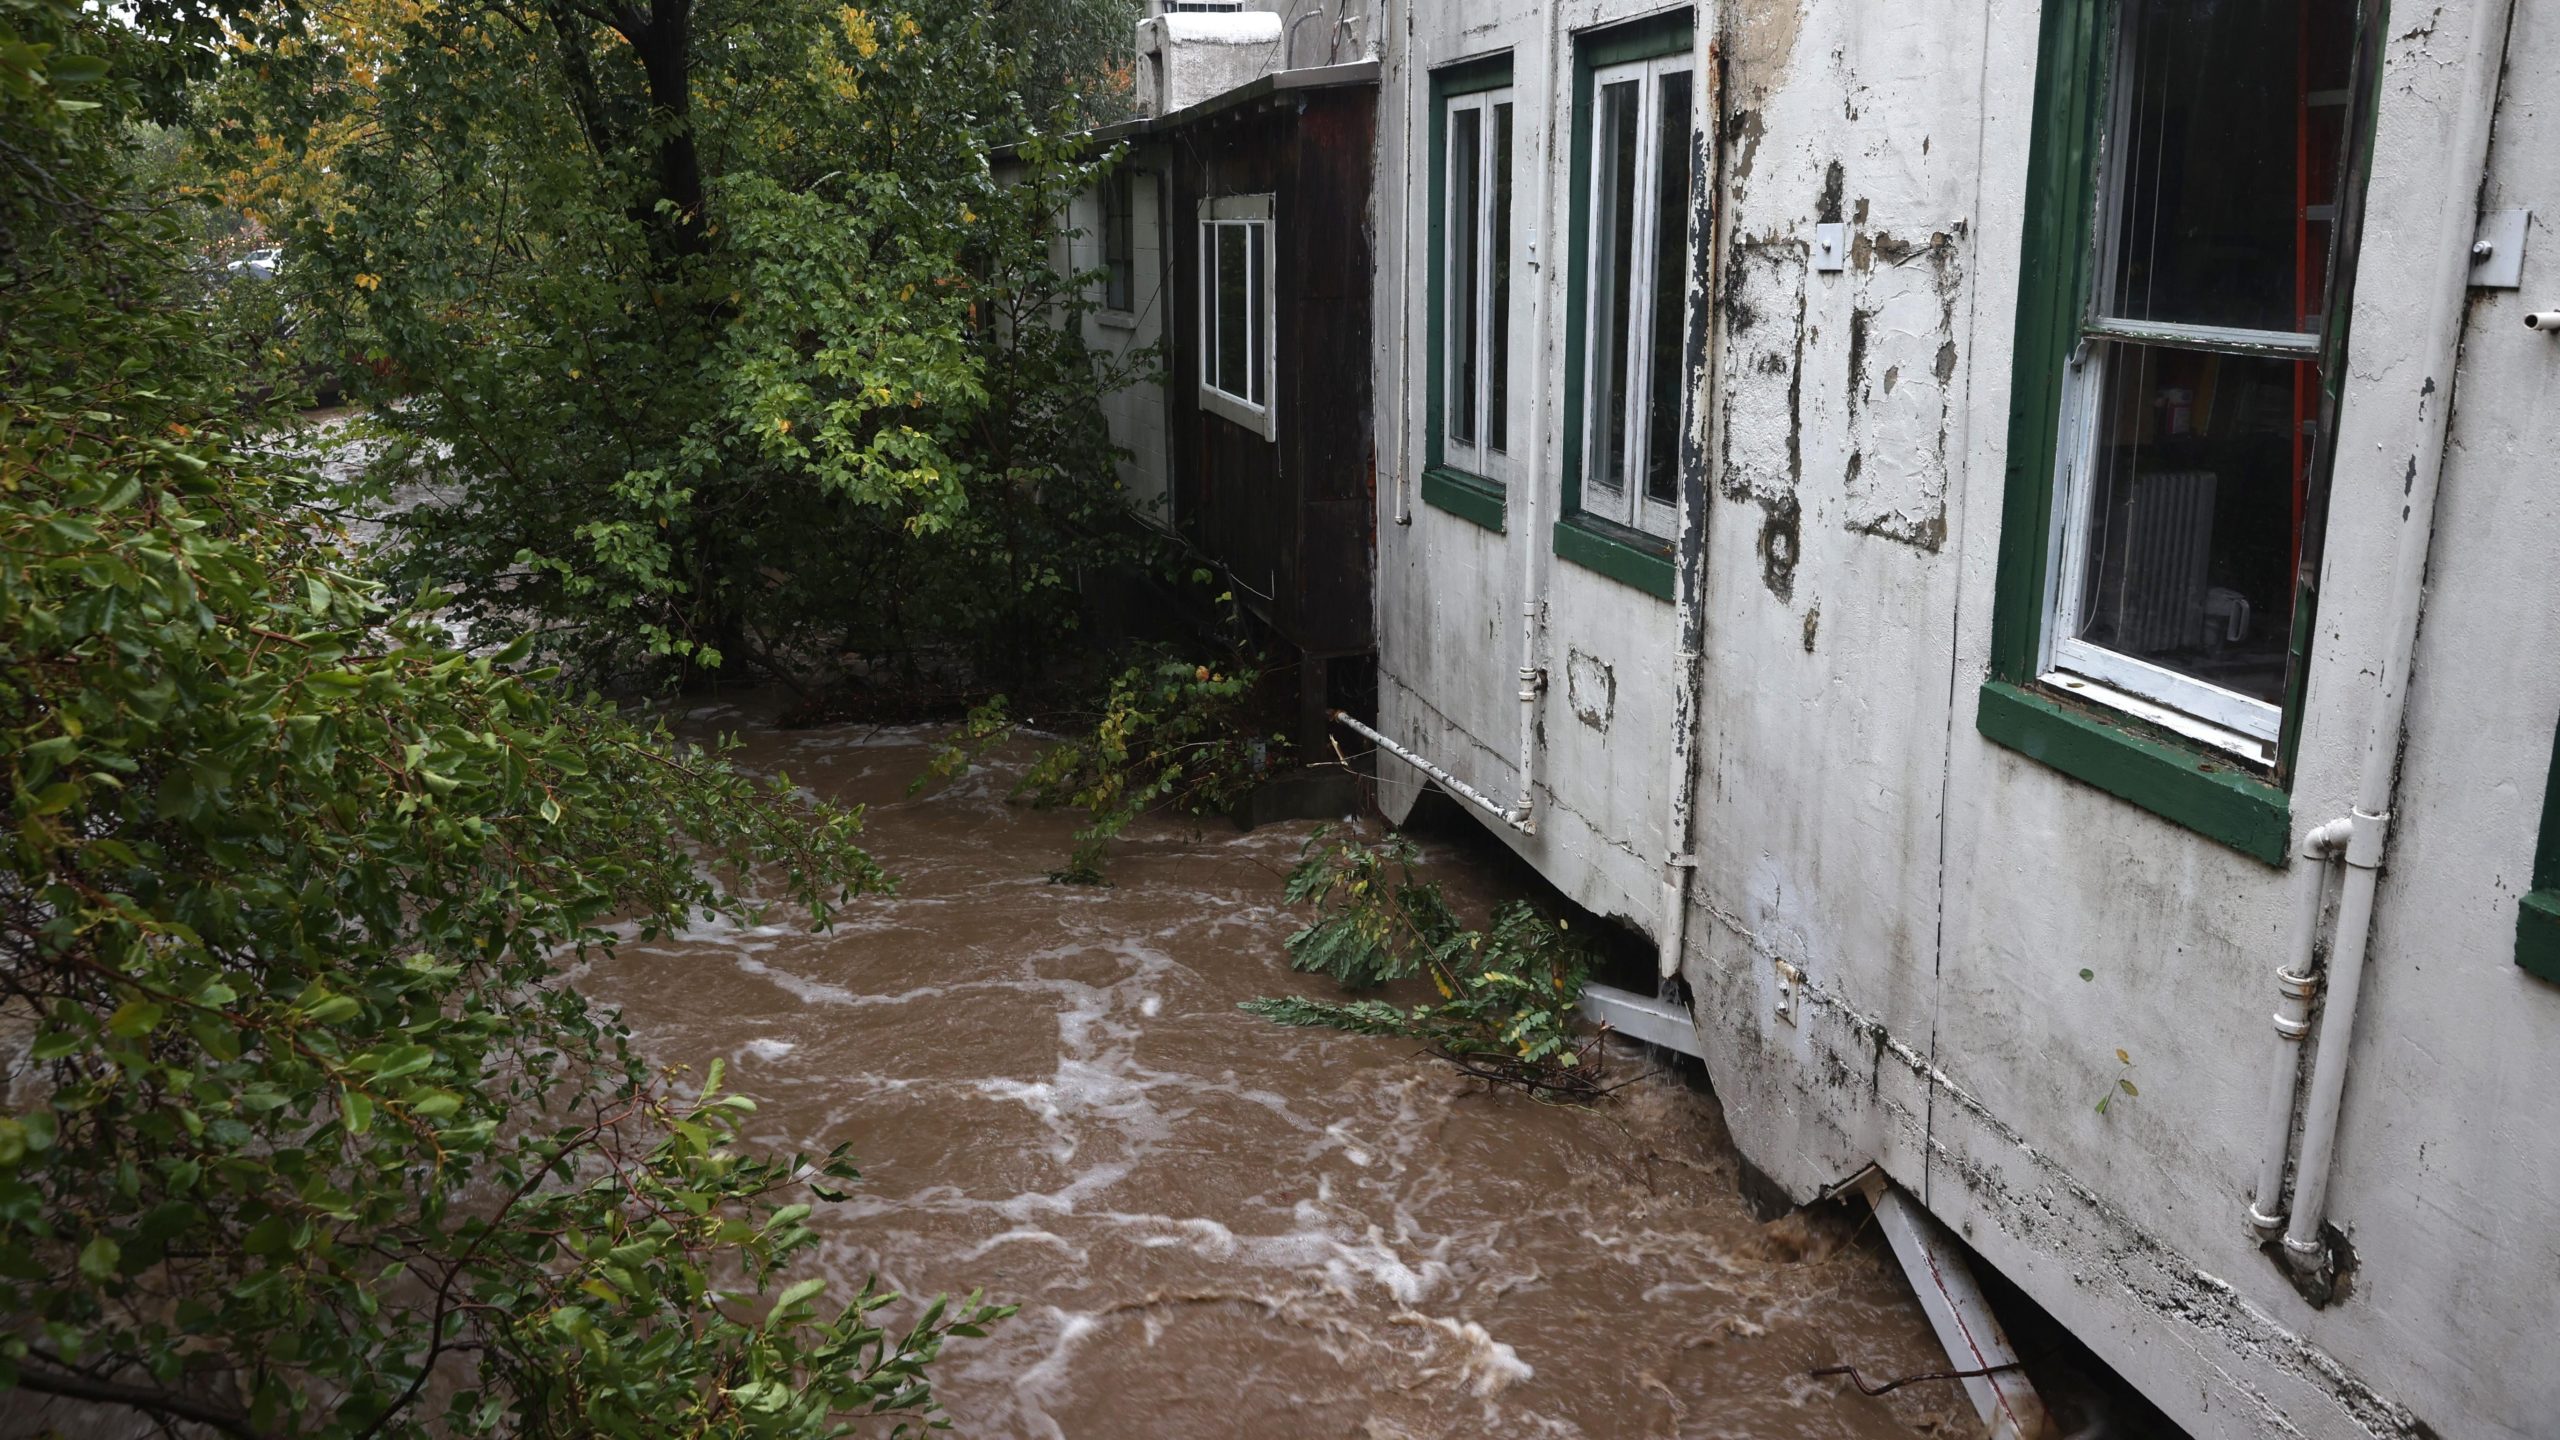 The swollen San Anselmo creek touches the bottom of businesses on October 24, 2021 in San Anselmo, California. (Photo: Justin Sullivan, Getty Images)